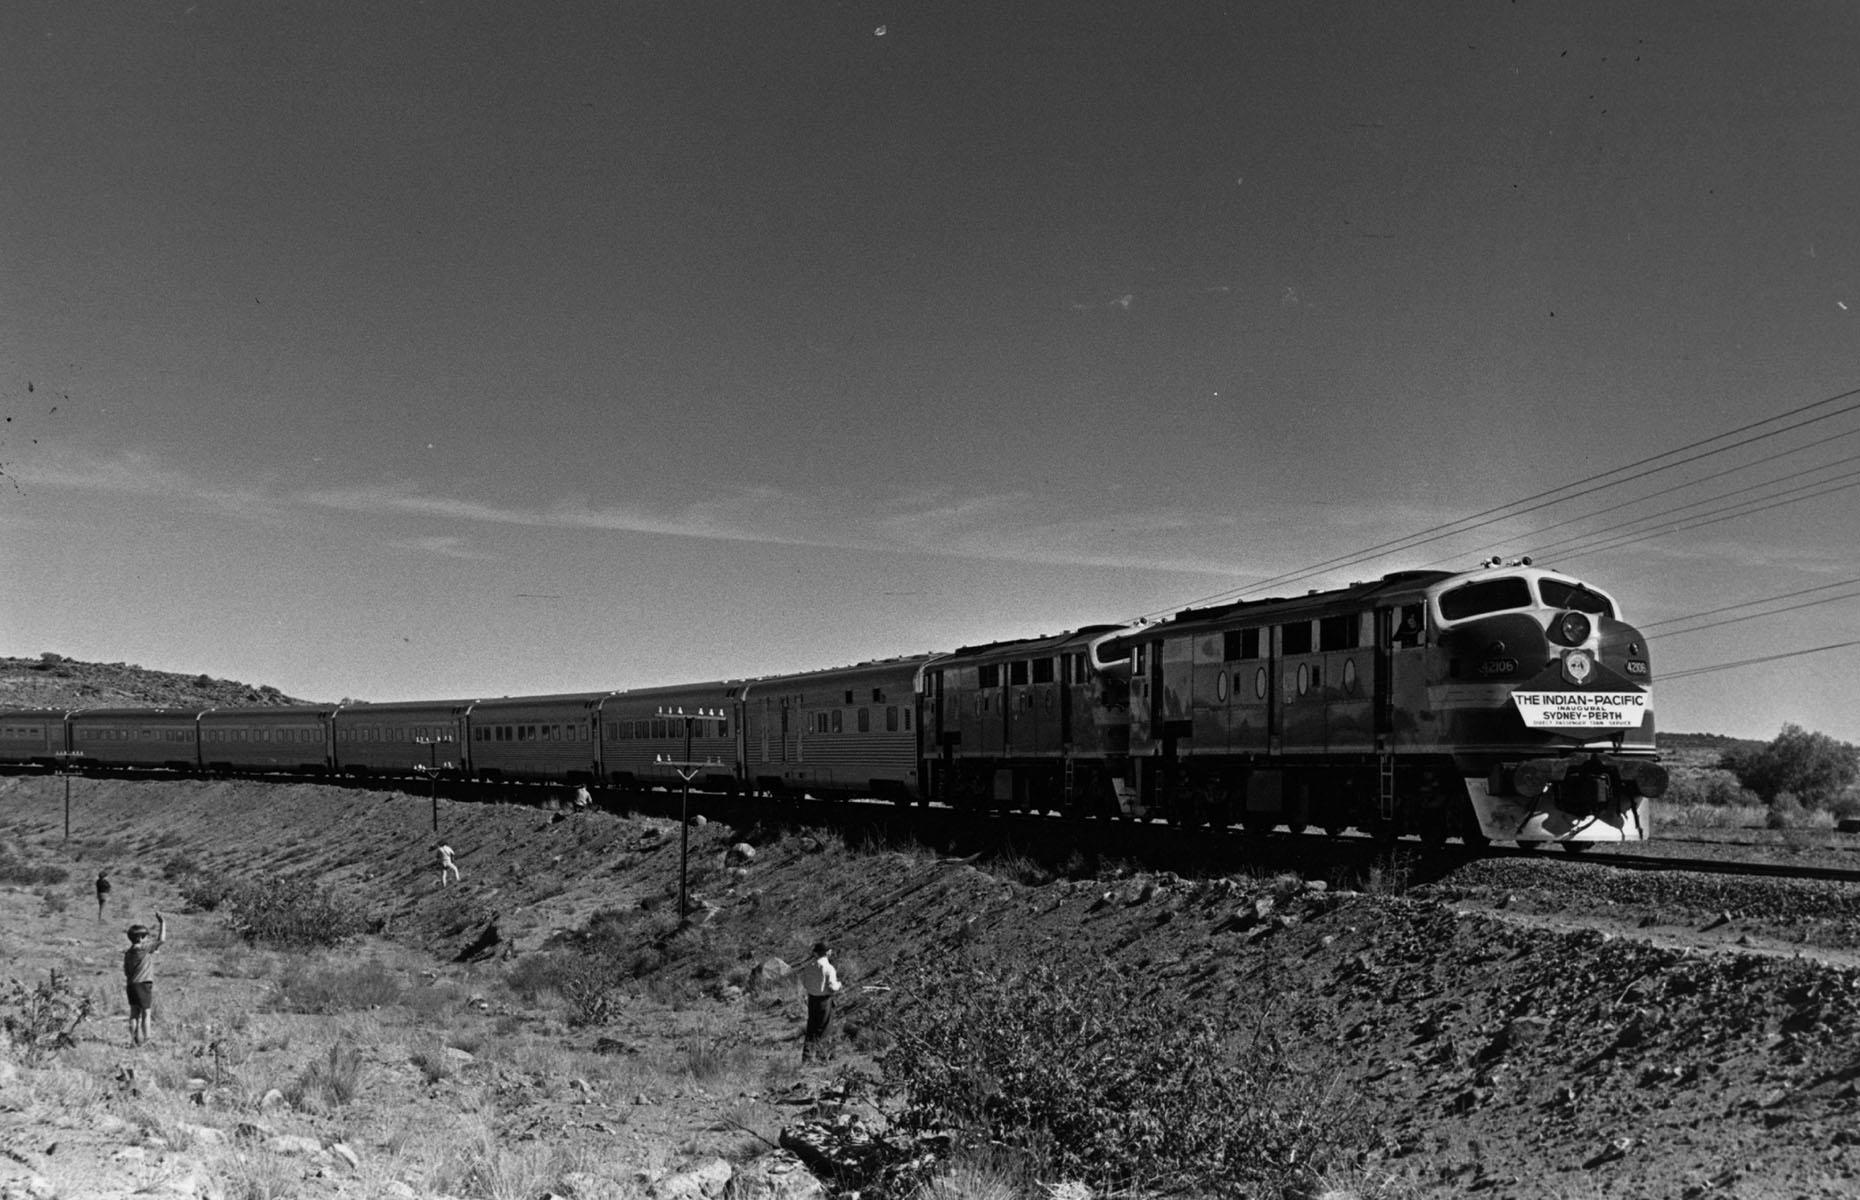 Surprisingly, it wasn't until 23 February 1970 when Australia's two coasts were finally linked by a direct rail service. More than 2,700 miles (4,345km) long, the journey between Perth in Western Australia and Sydney in New South Wales took around 75 hours to complete. Here, the new Indian Pacific (originally named The Transcontinental) is making its first journey in 1970.